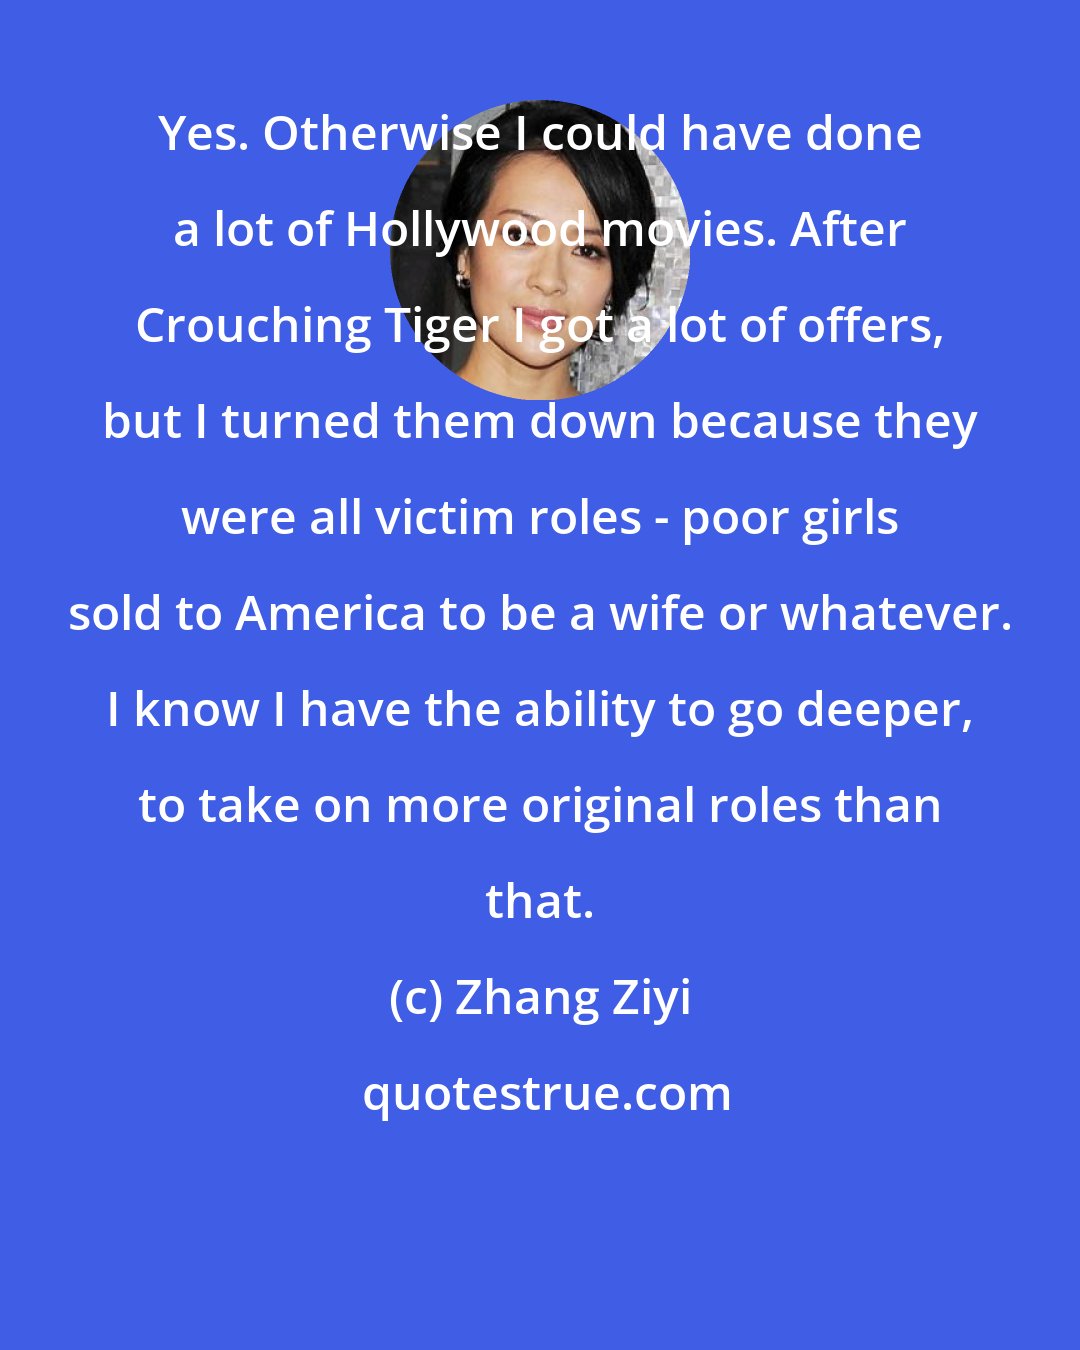 Zhang Ziyi: Yes. Otherwise I could have done a lot of Hollywood movies. After Crouching Tiger I got a lot of offers, but I turned them down because they were all victim roles - poor girls sold to America to be a wife or whatever. I know I have the ability to go deeper, to take on more original roles than that.